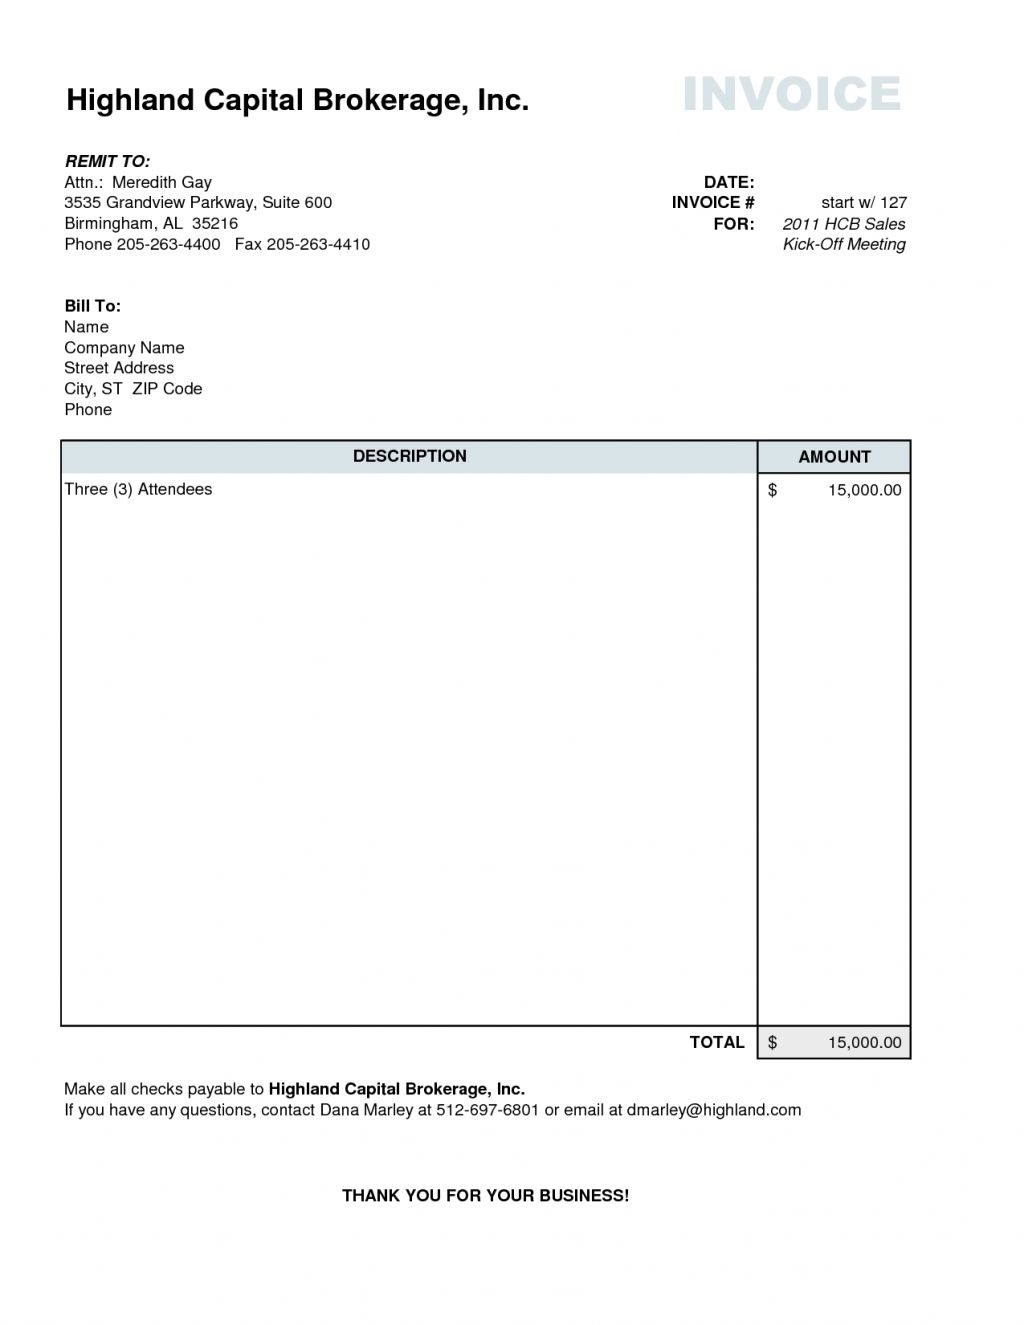 invoices text or email